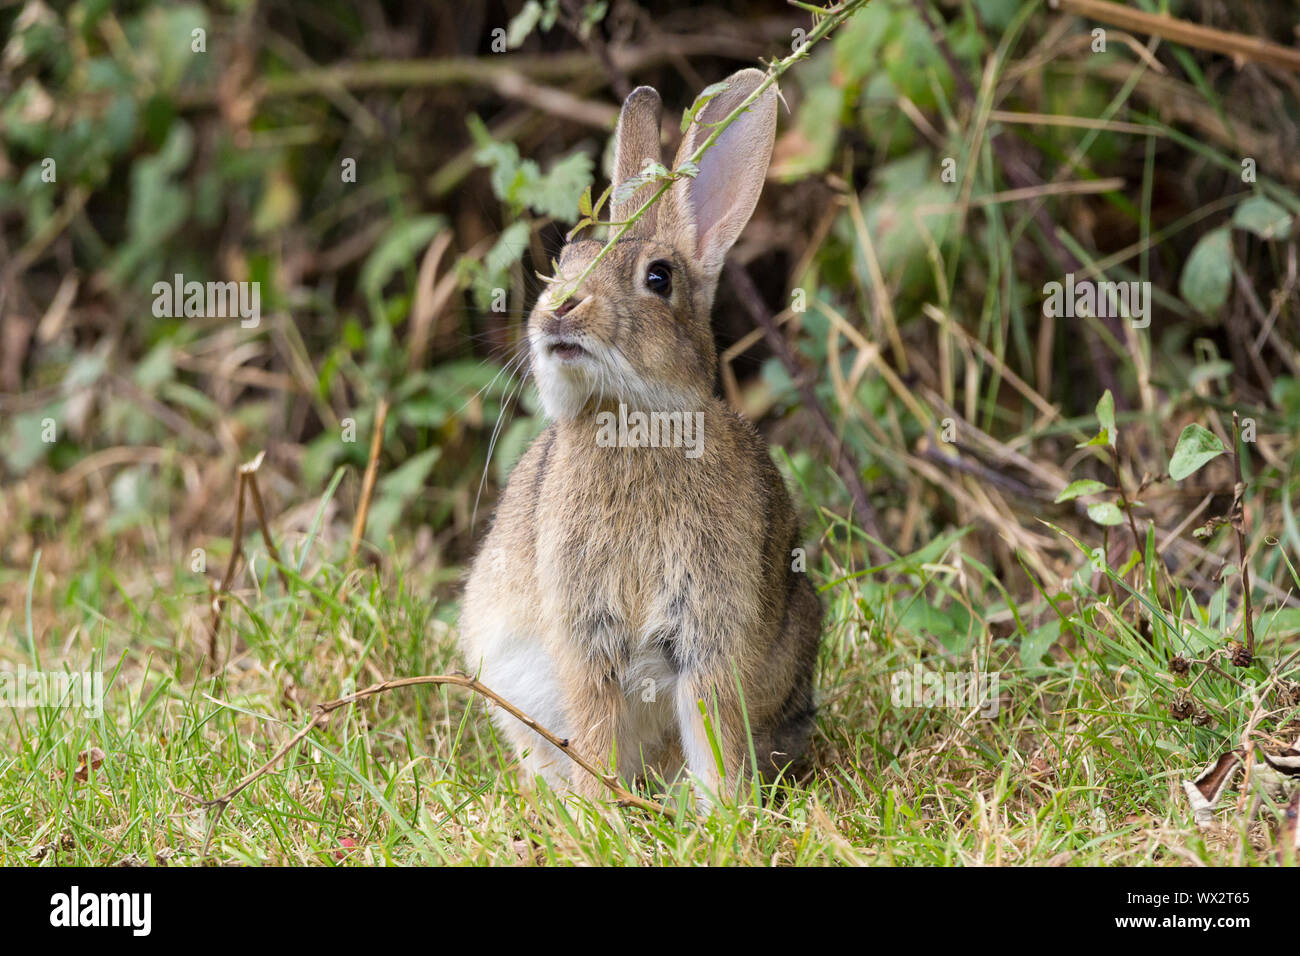 Rabbit (Oryctolagus canniculus) grey brown fur with underside white or light grey long ears and small cotton bud tail. Large dark eyes long rear legs. Stock Photo